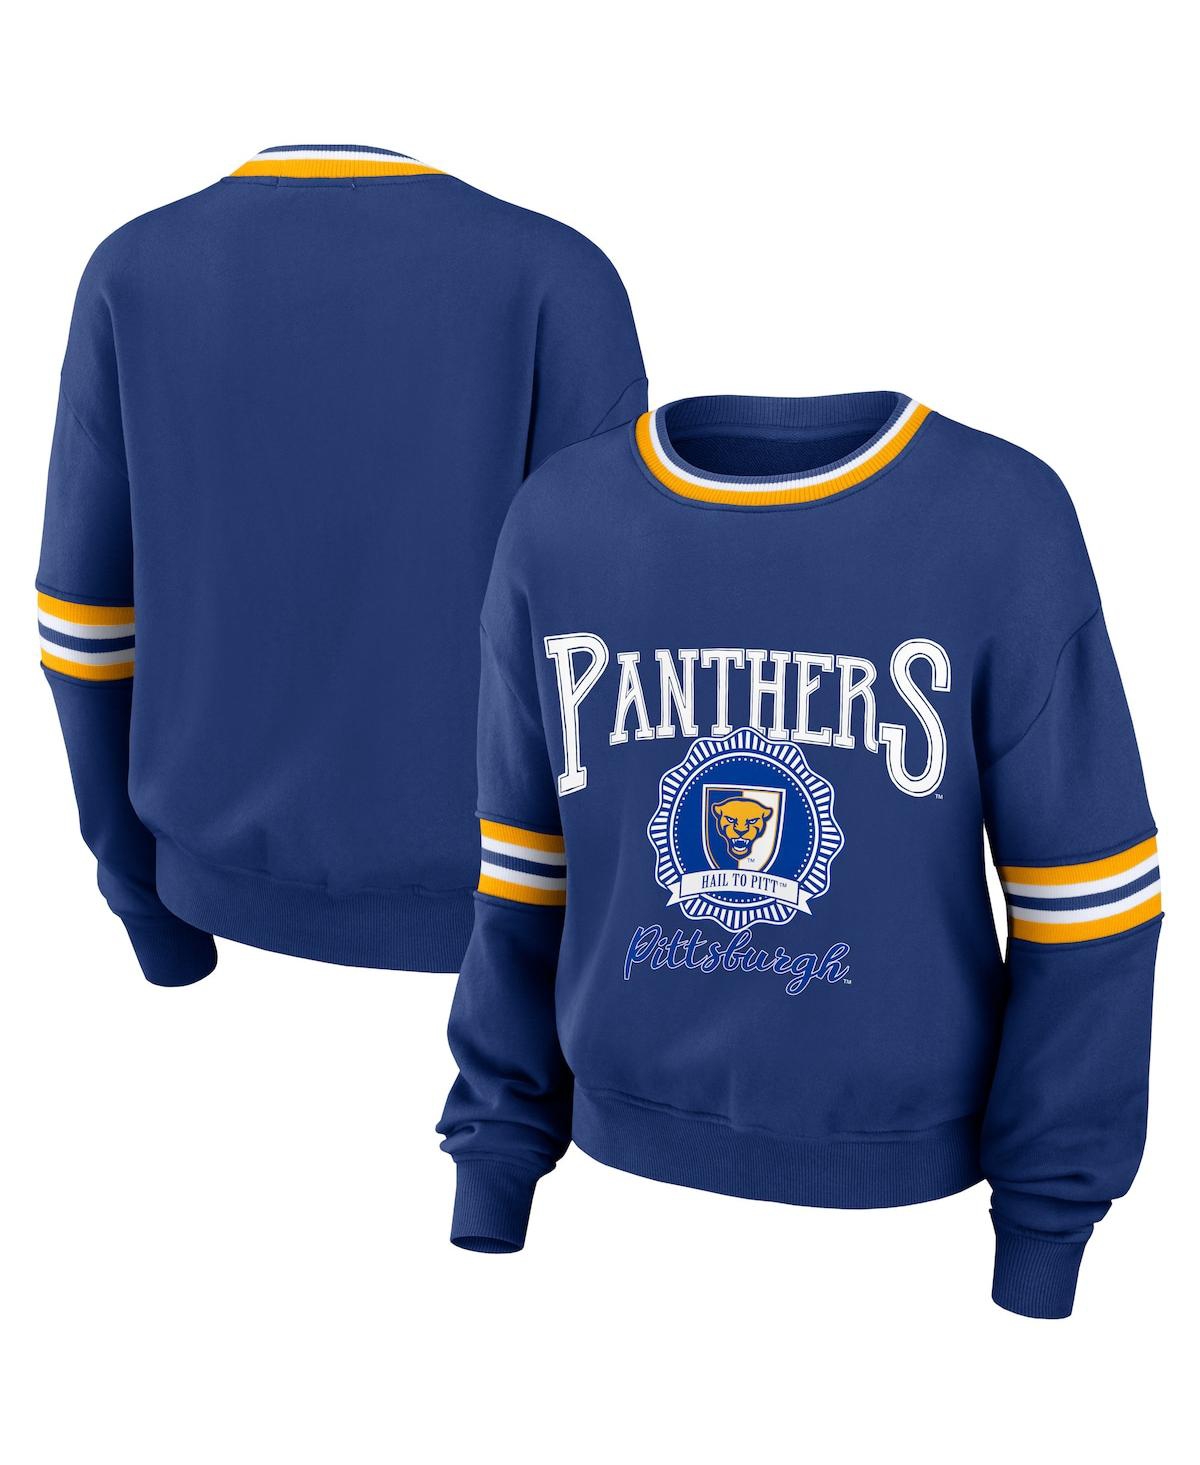 Wear By Erin Andrews Women's  Royal Distressed Pitt Panthers Vintage-like Pullover Sweatshirt